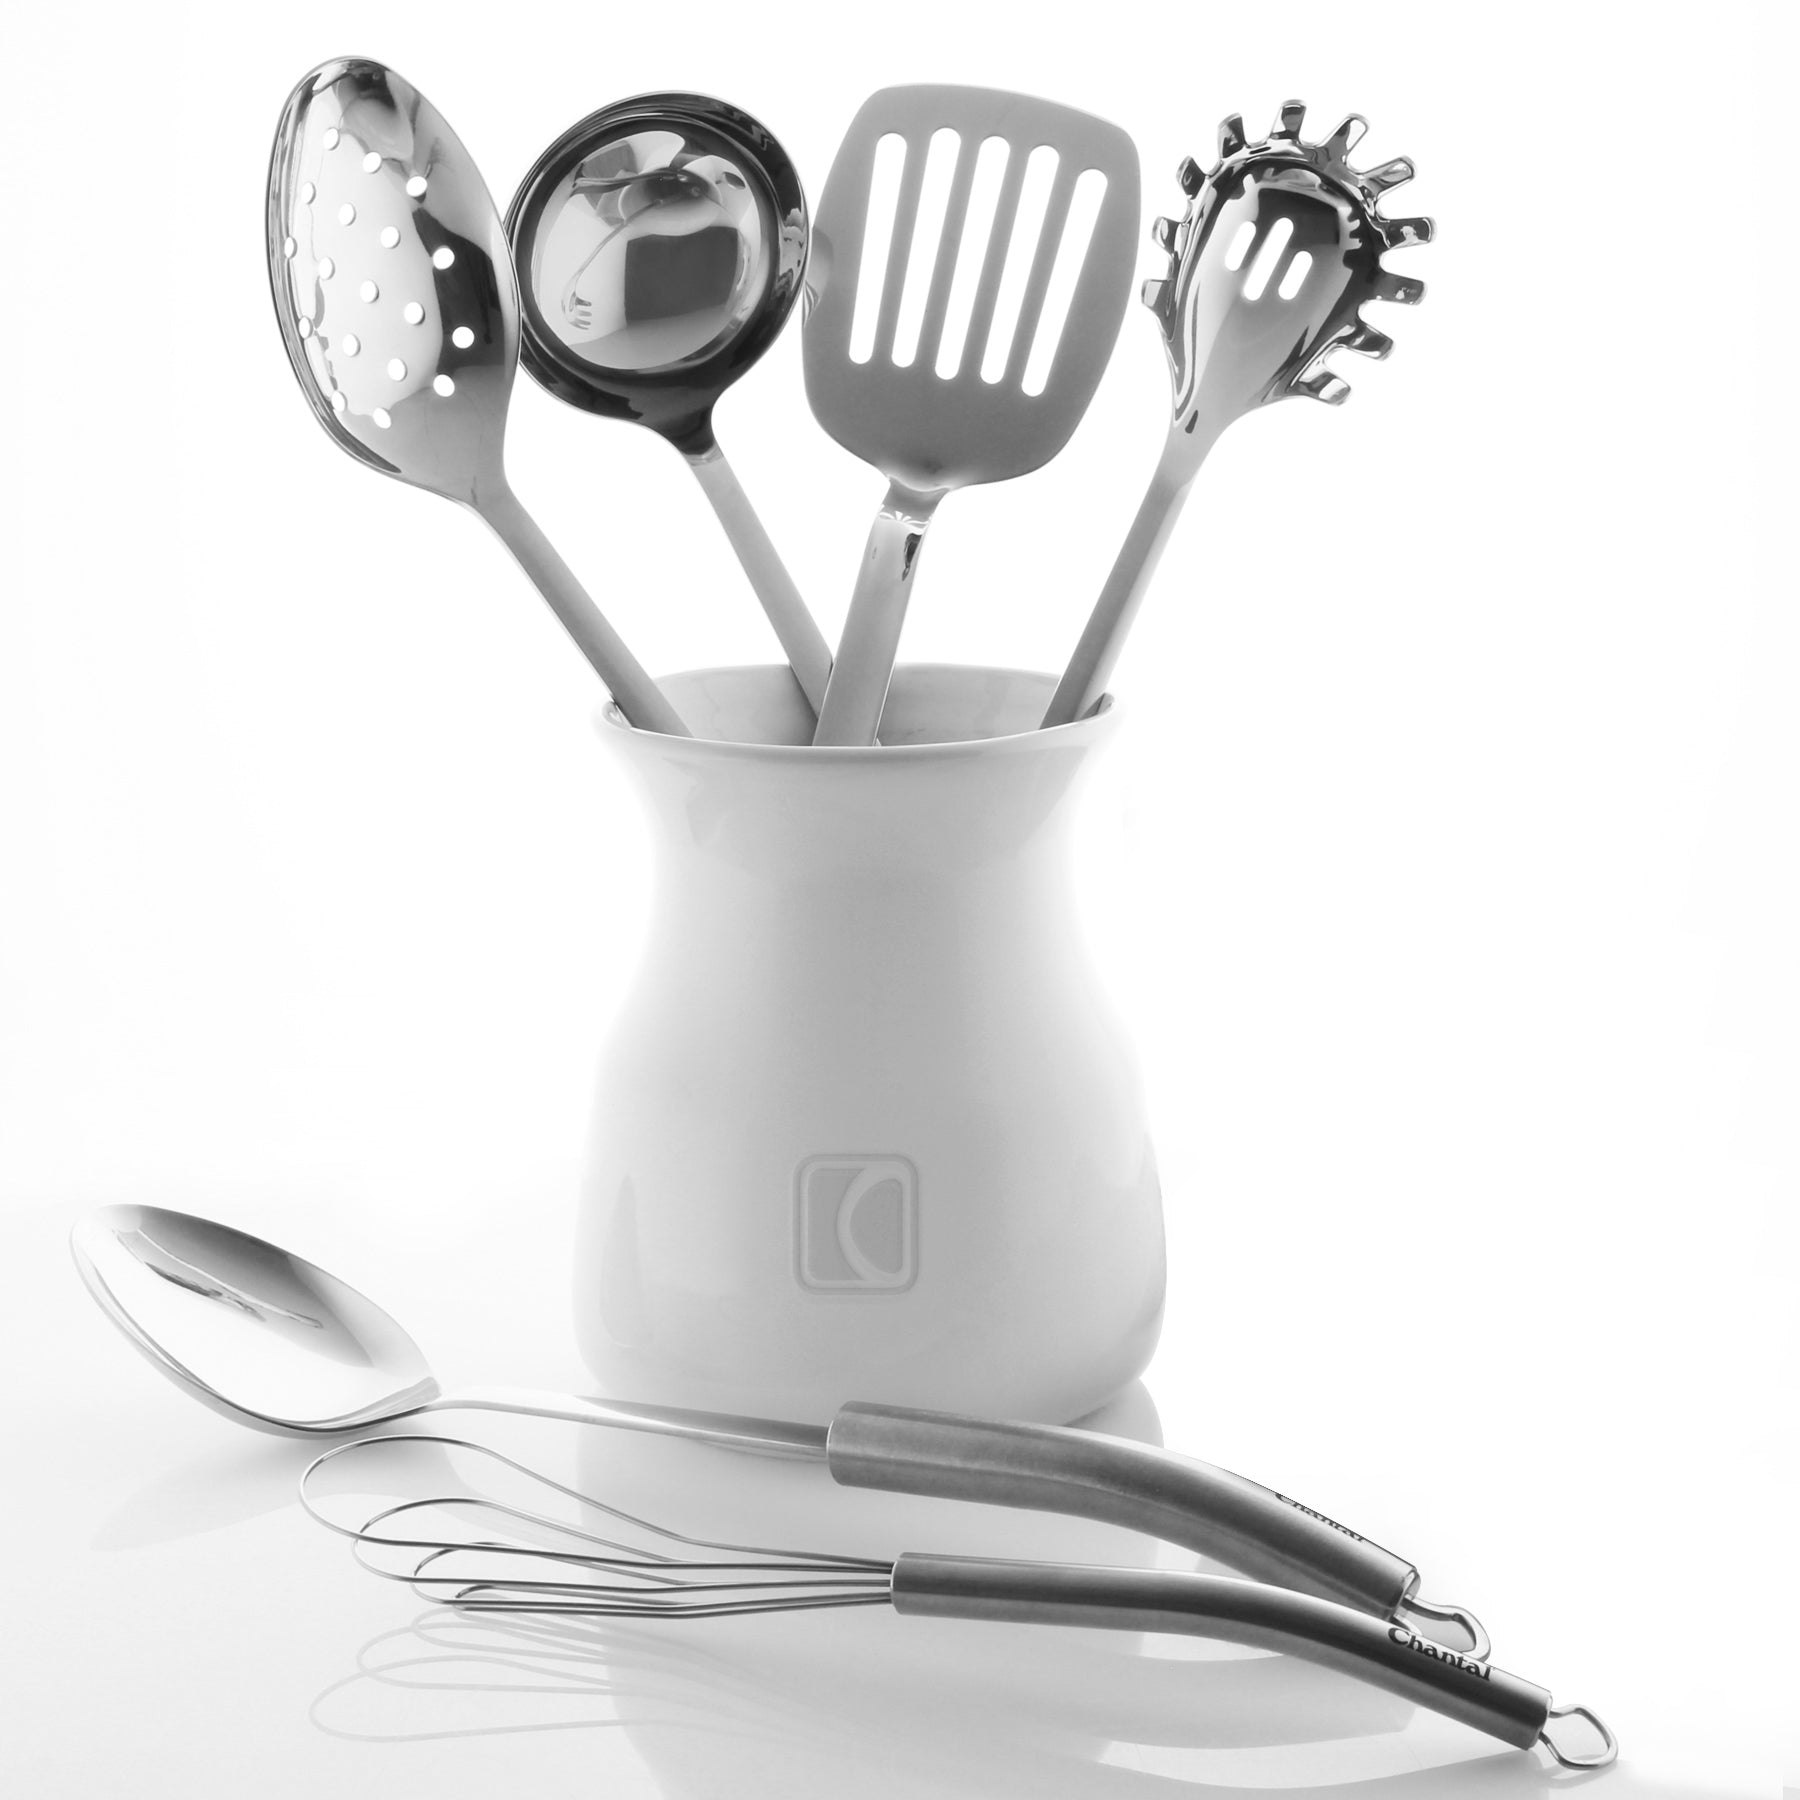 utensil crock and all 6 kitchen tools